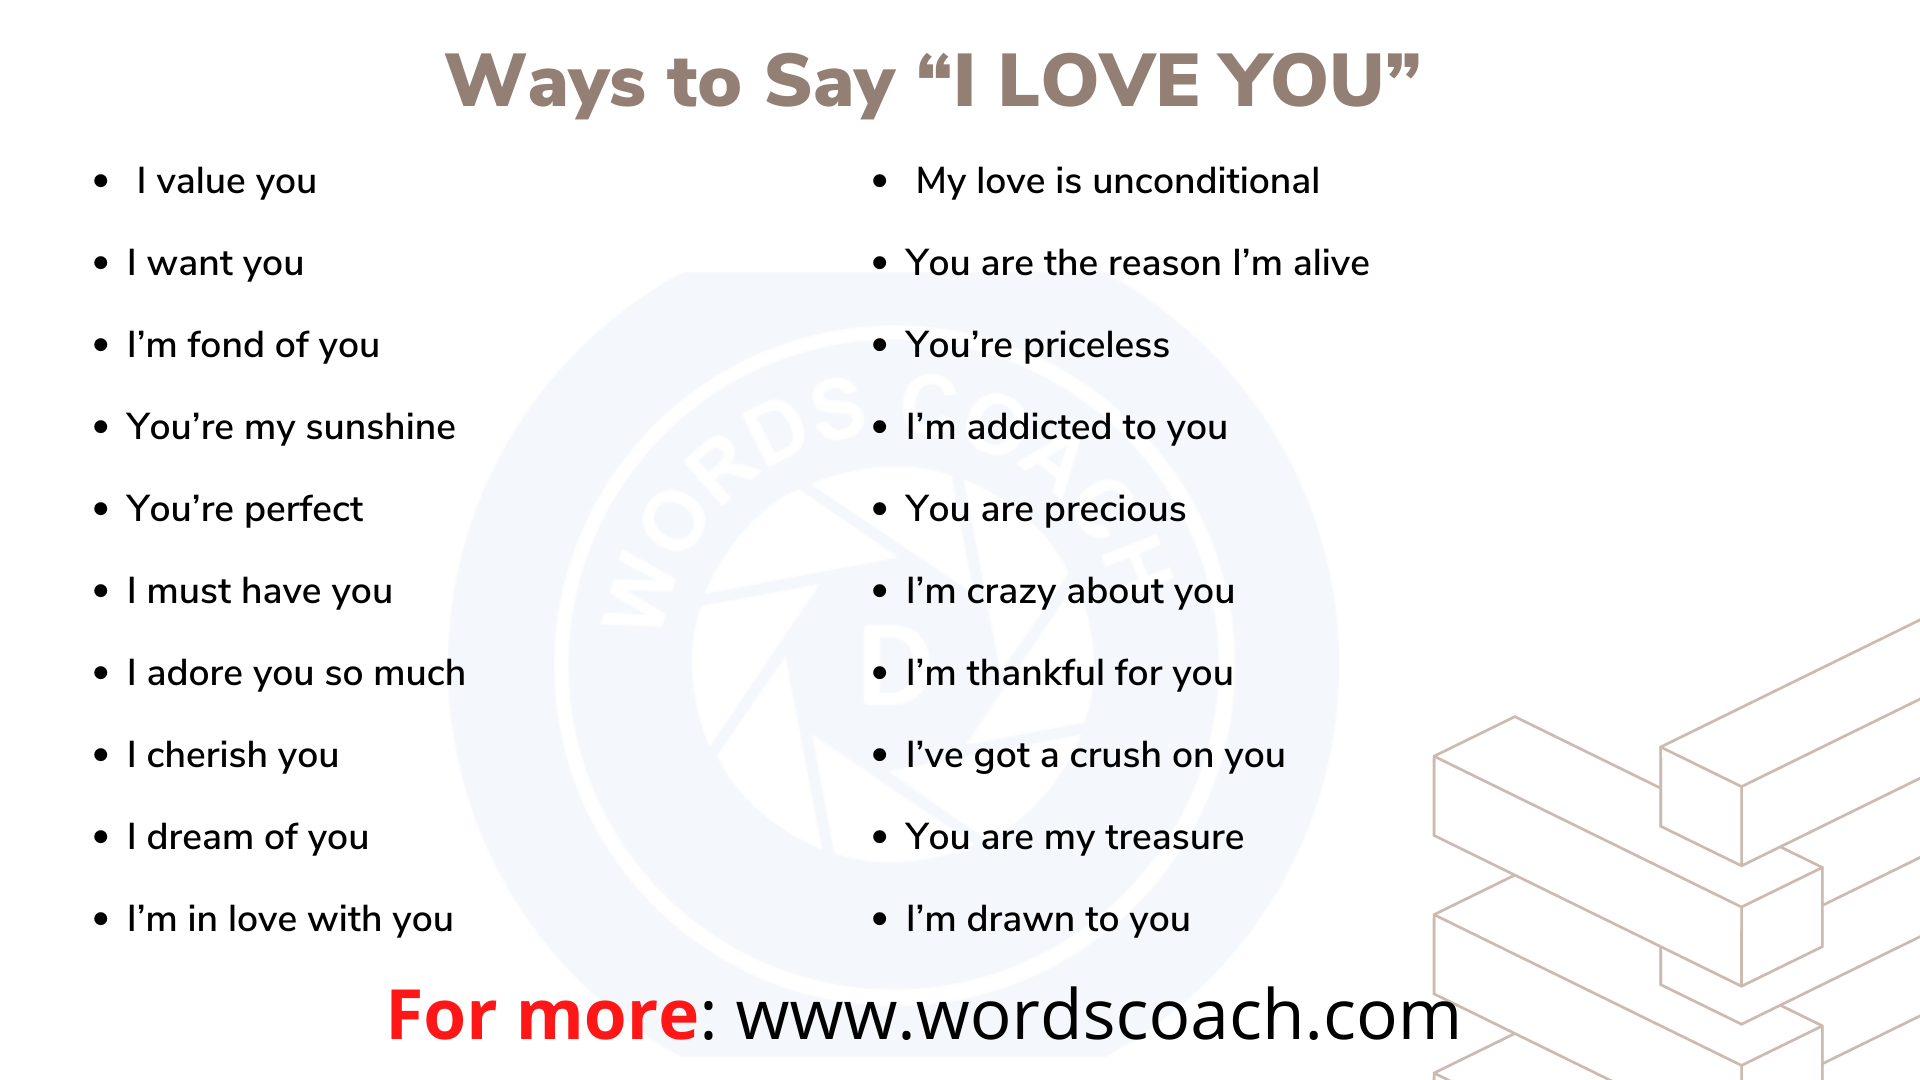 Another Ways to Say “I LOVE YOU” in English